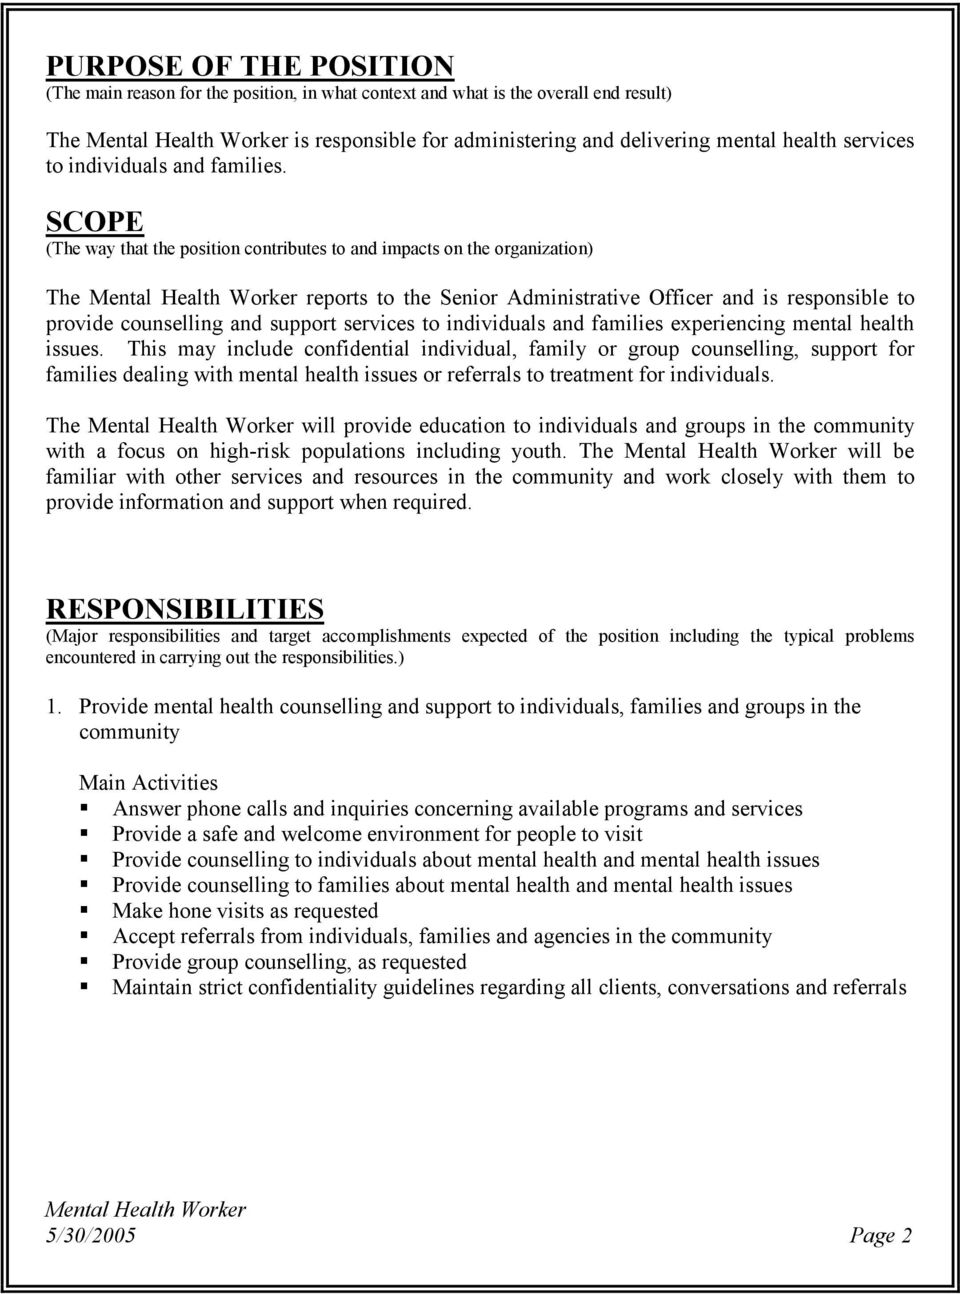 SCOPE (The way that the position contributes to and impacts on the organization) The reports to the Senior Administrative Officer and is responsible to provide counselling and support services to